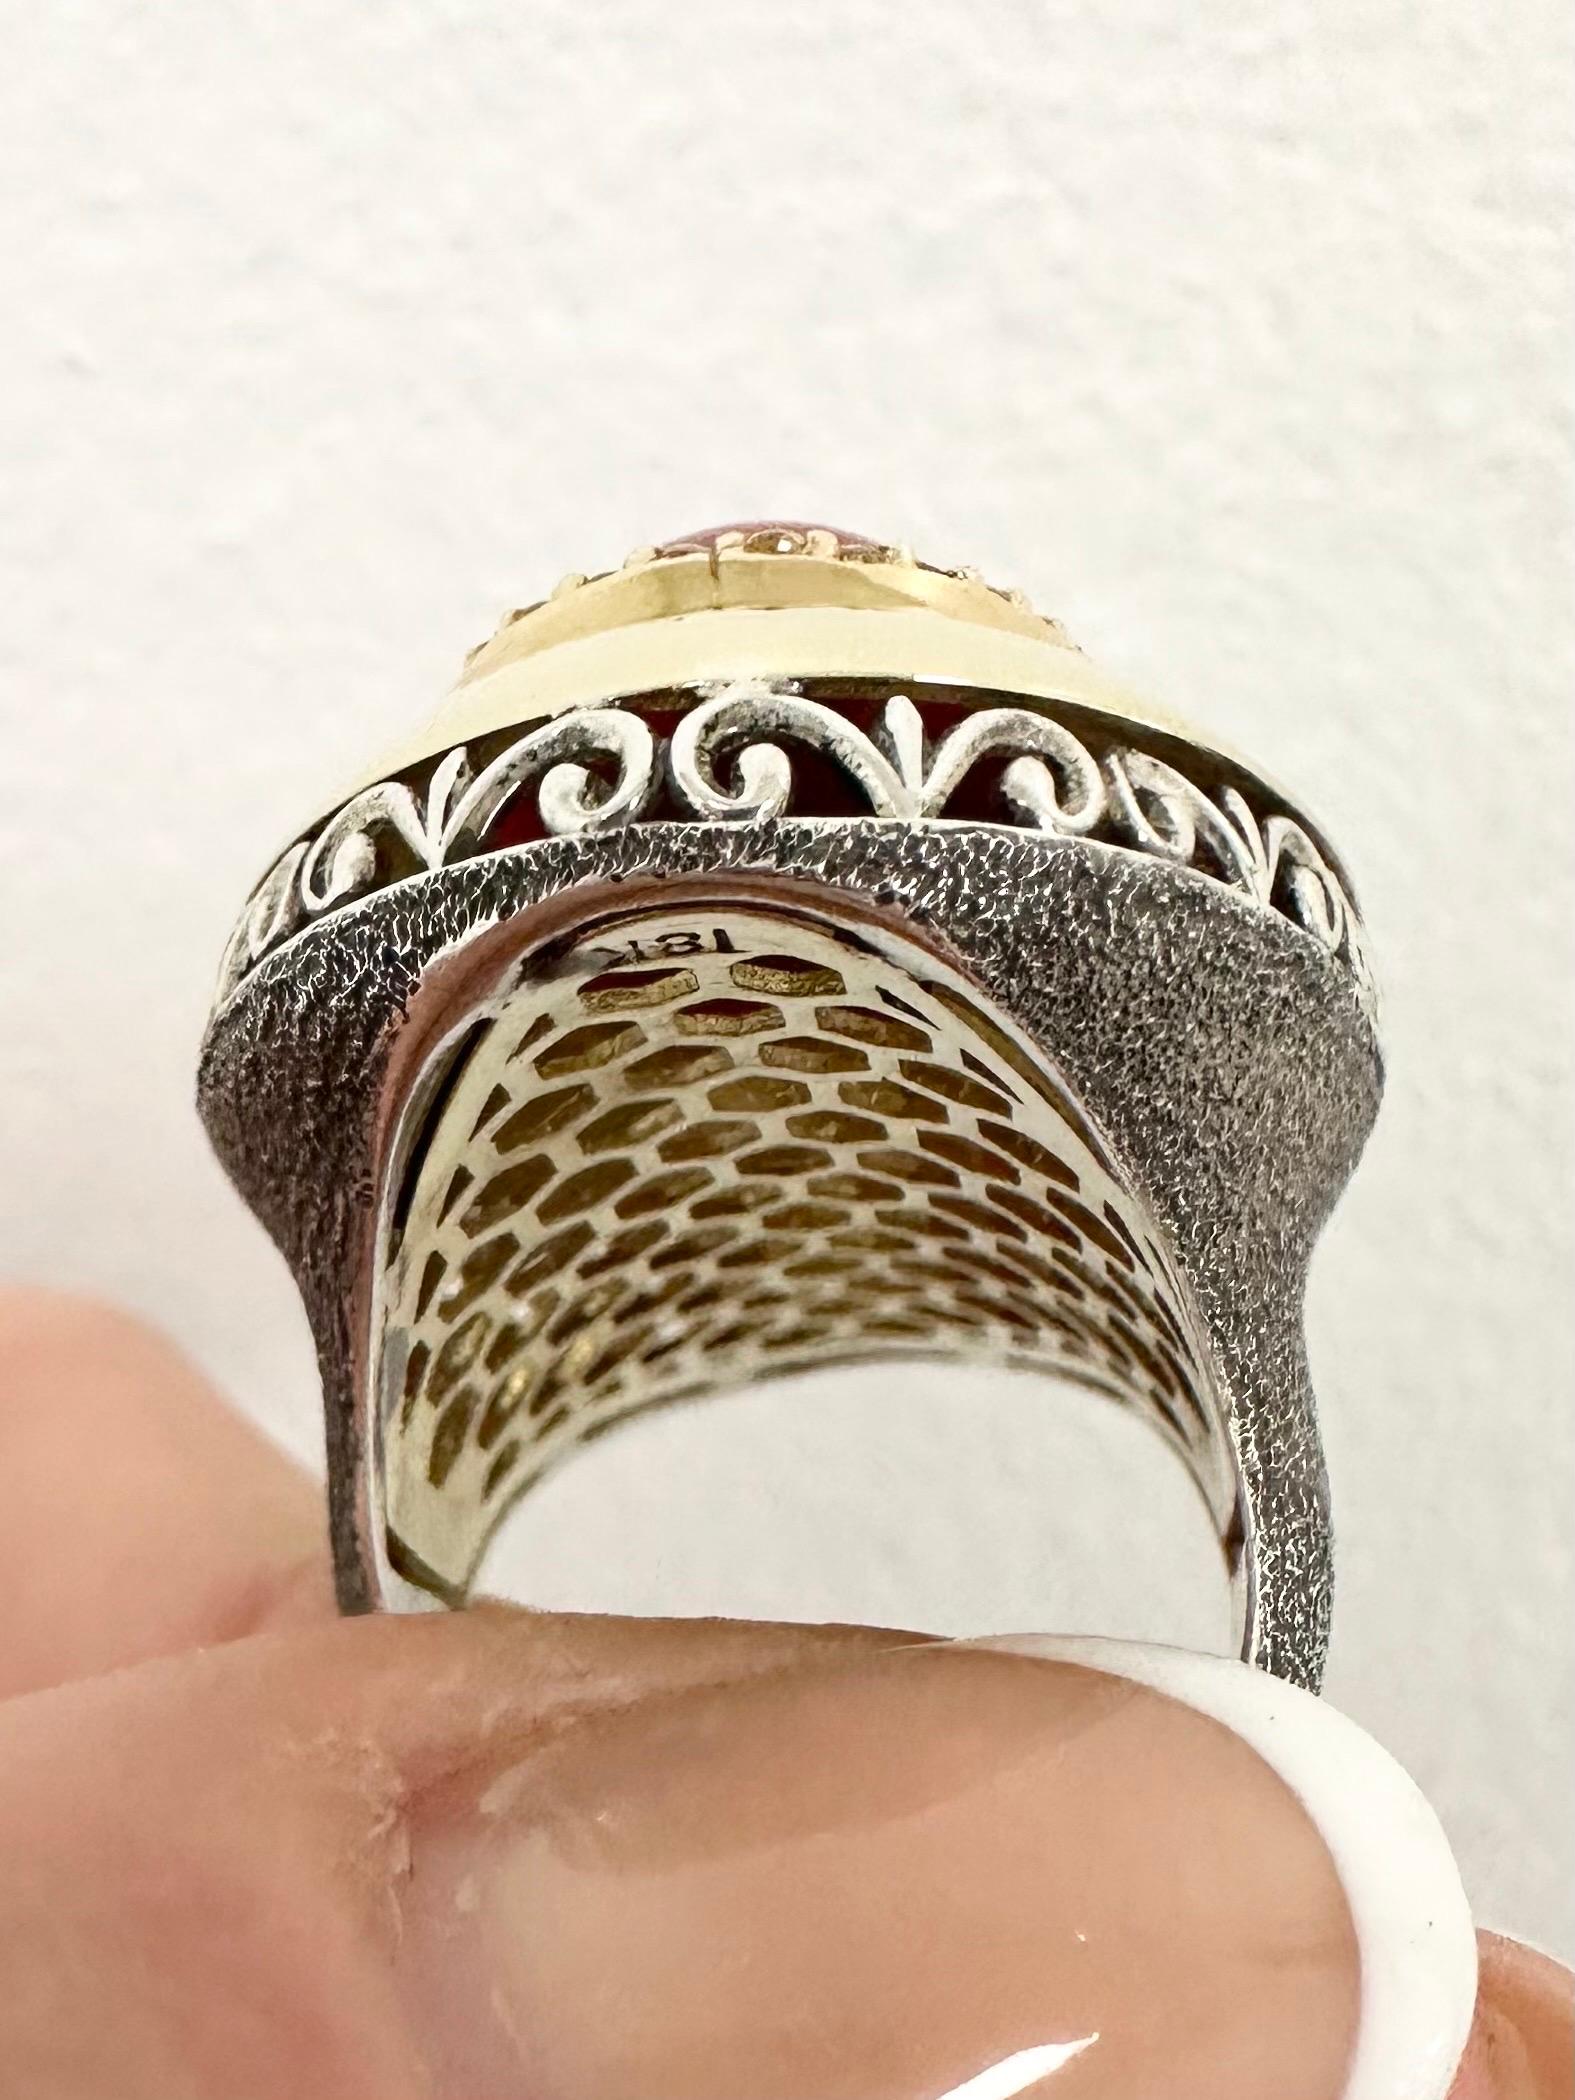 Exquisite ring made with natural red coral(undyed 100% natural and certified) diamond halo and 18KT yellow gold as well as silver pieces. Very complex design and a lot of handwork details in this ring. Designer unknown but probability is Italian